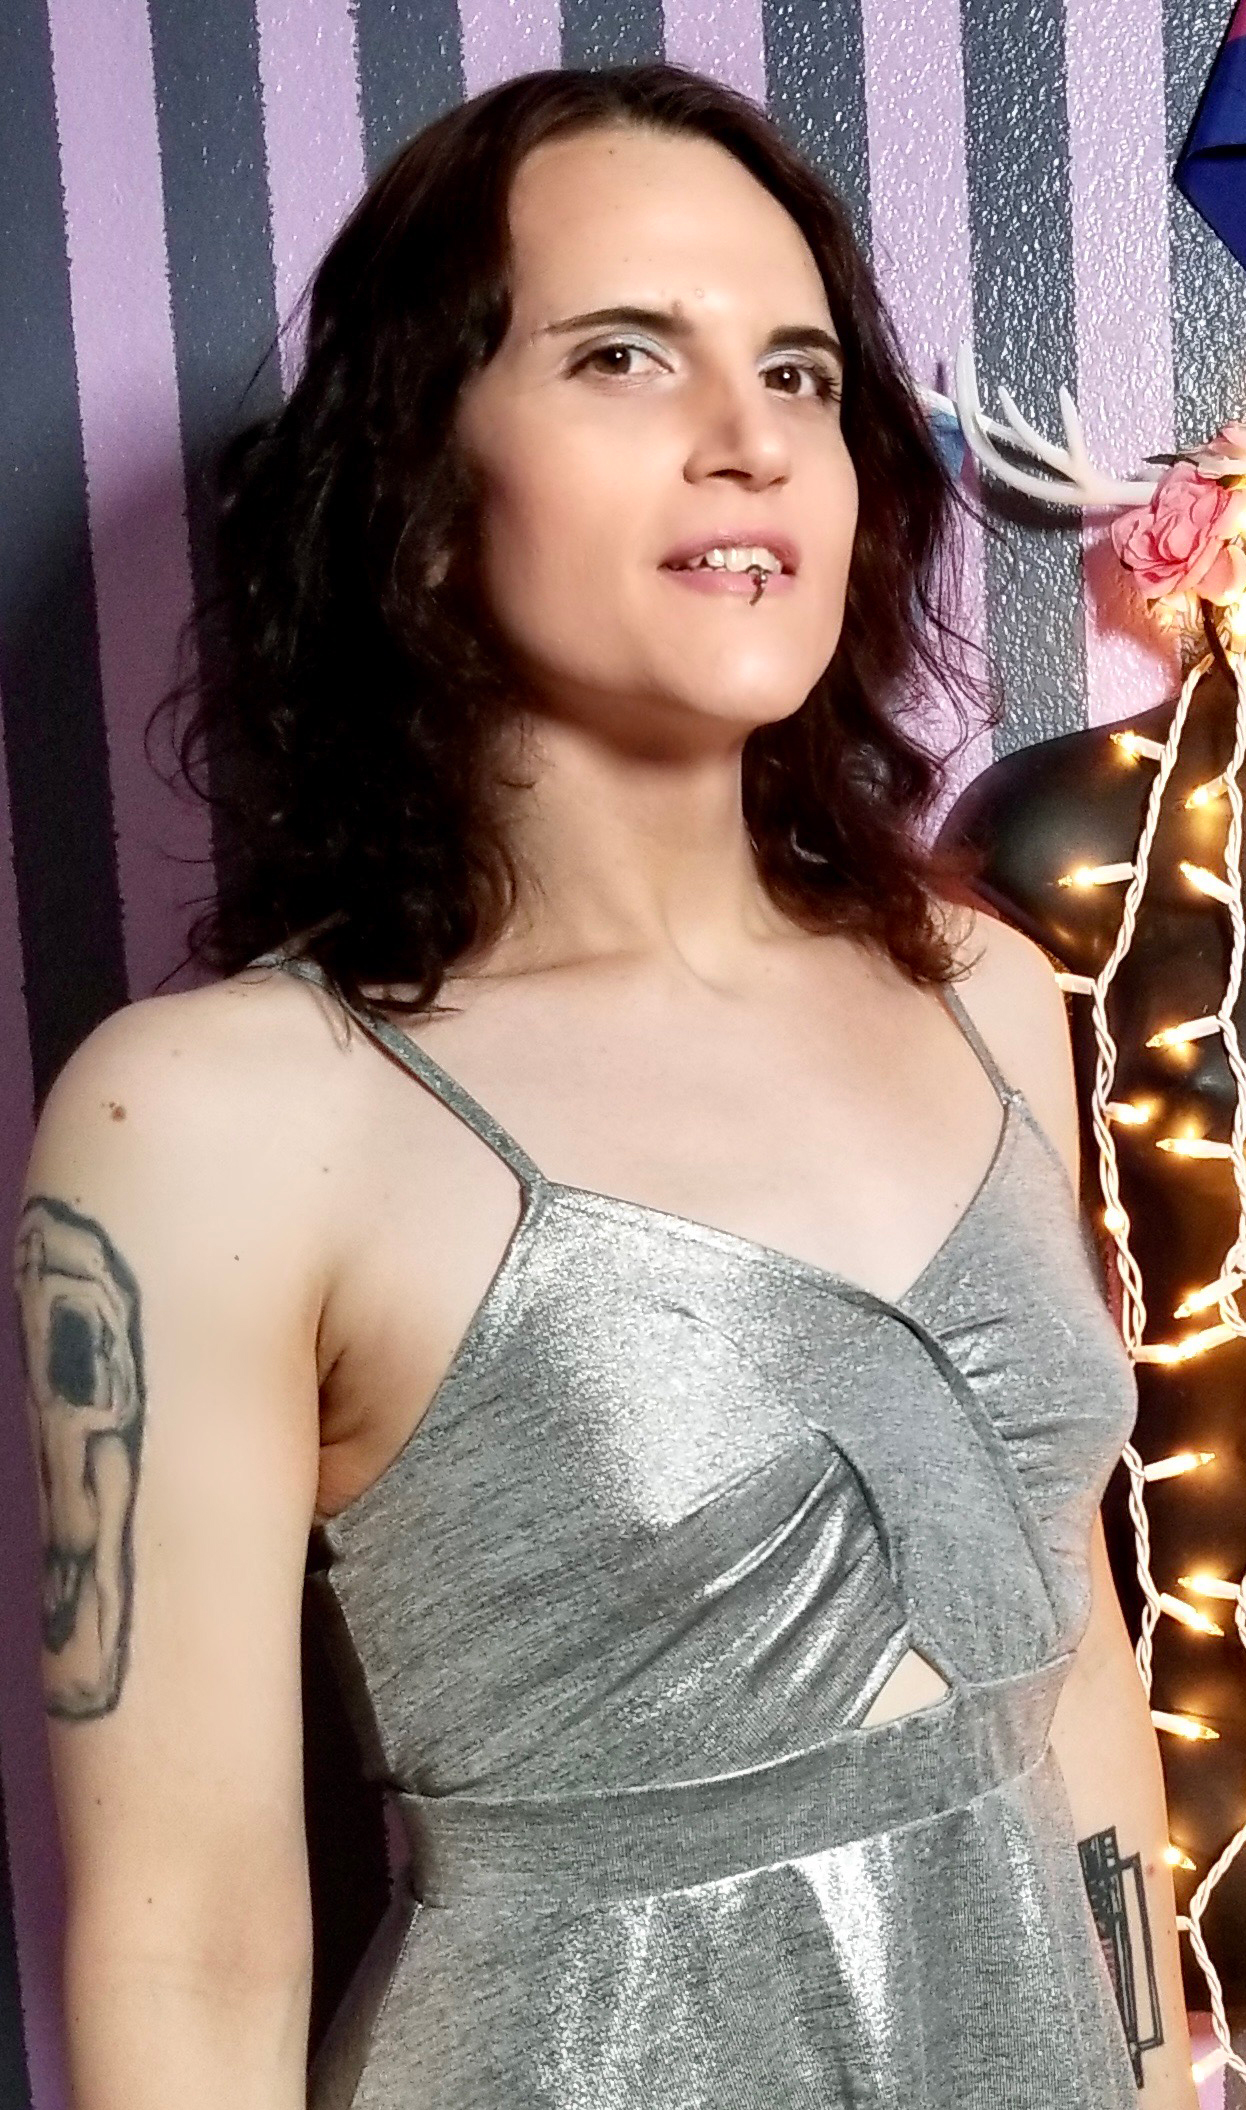 A headshot of Meika Grimm wearing a silver dress. She has long dark hair and is smiling in front of a decorative wall with lights